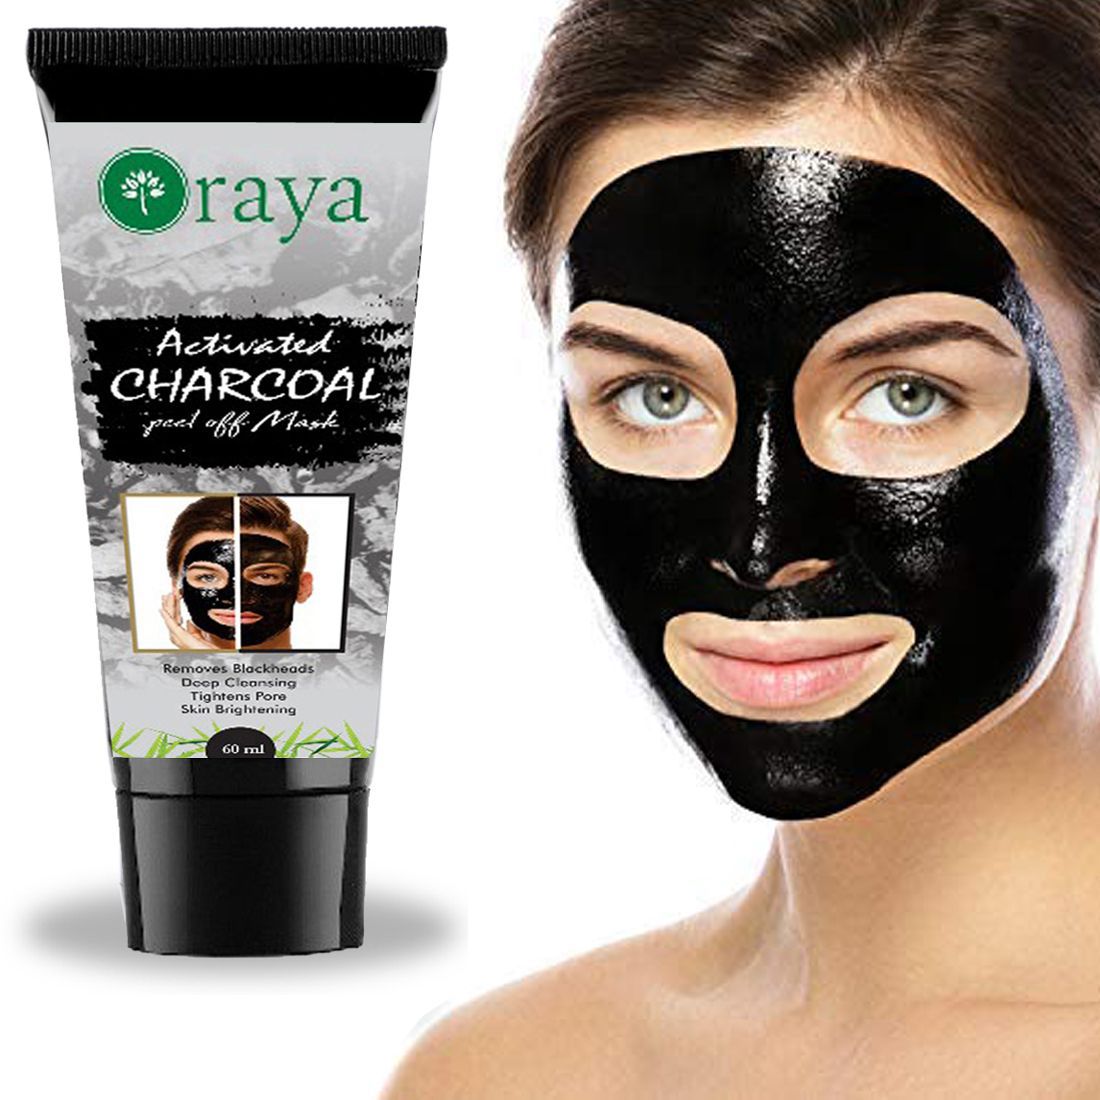 ORAYA Charcoal Blackhead Removal Mask & For Charcoal Face Peel Off 